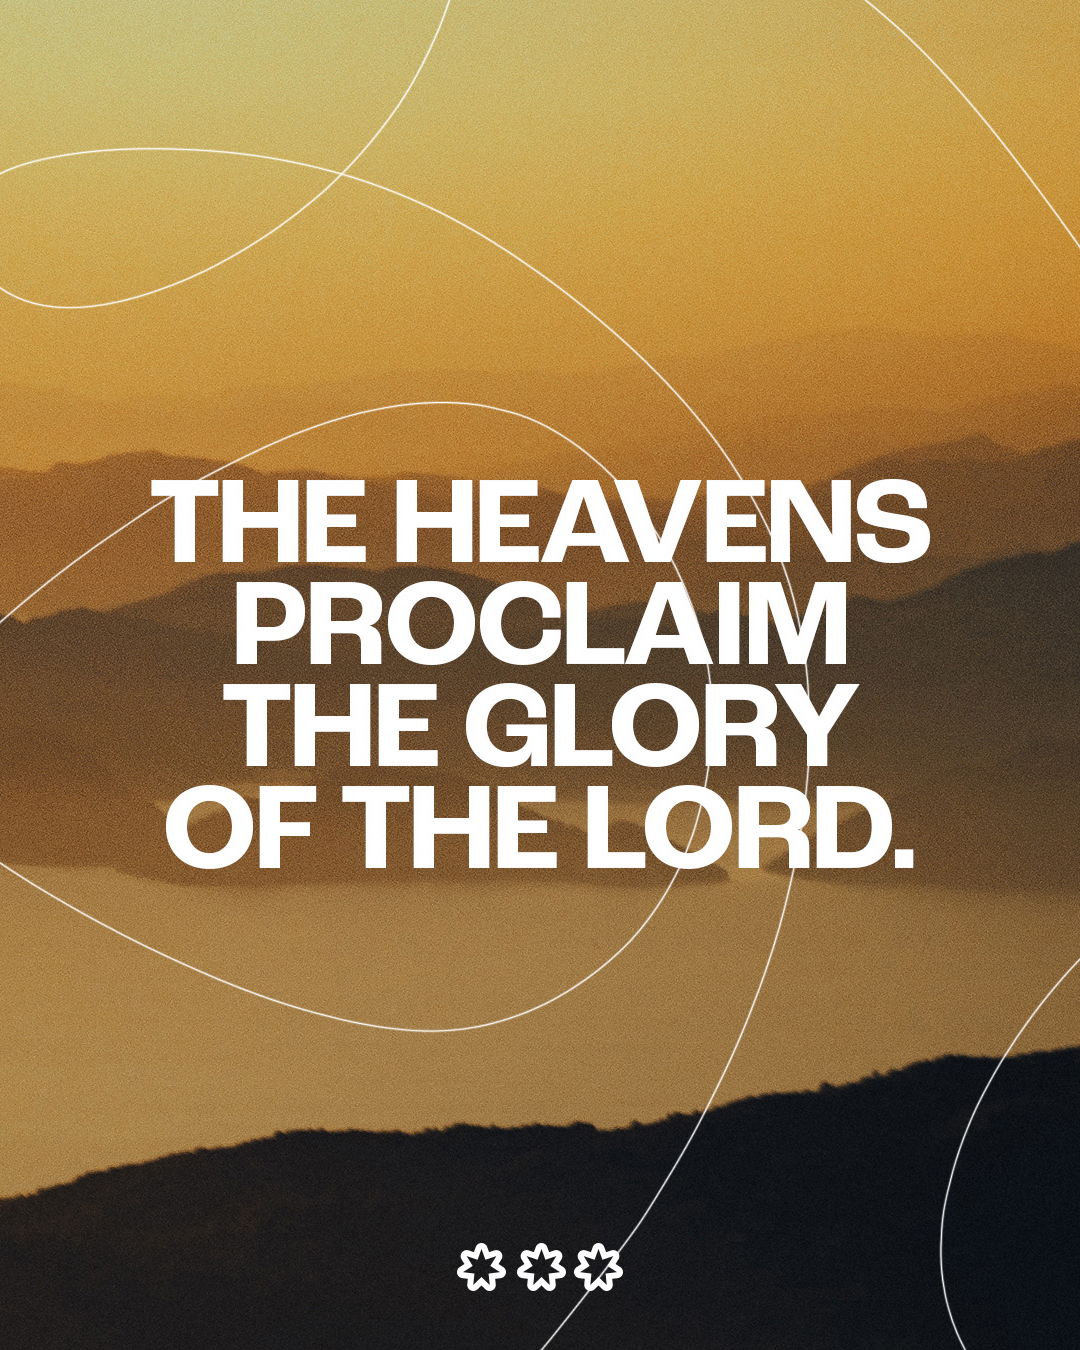 The Heavens proclaim the glory of the Lord.